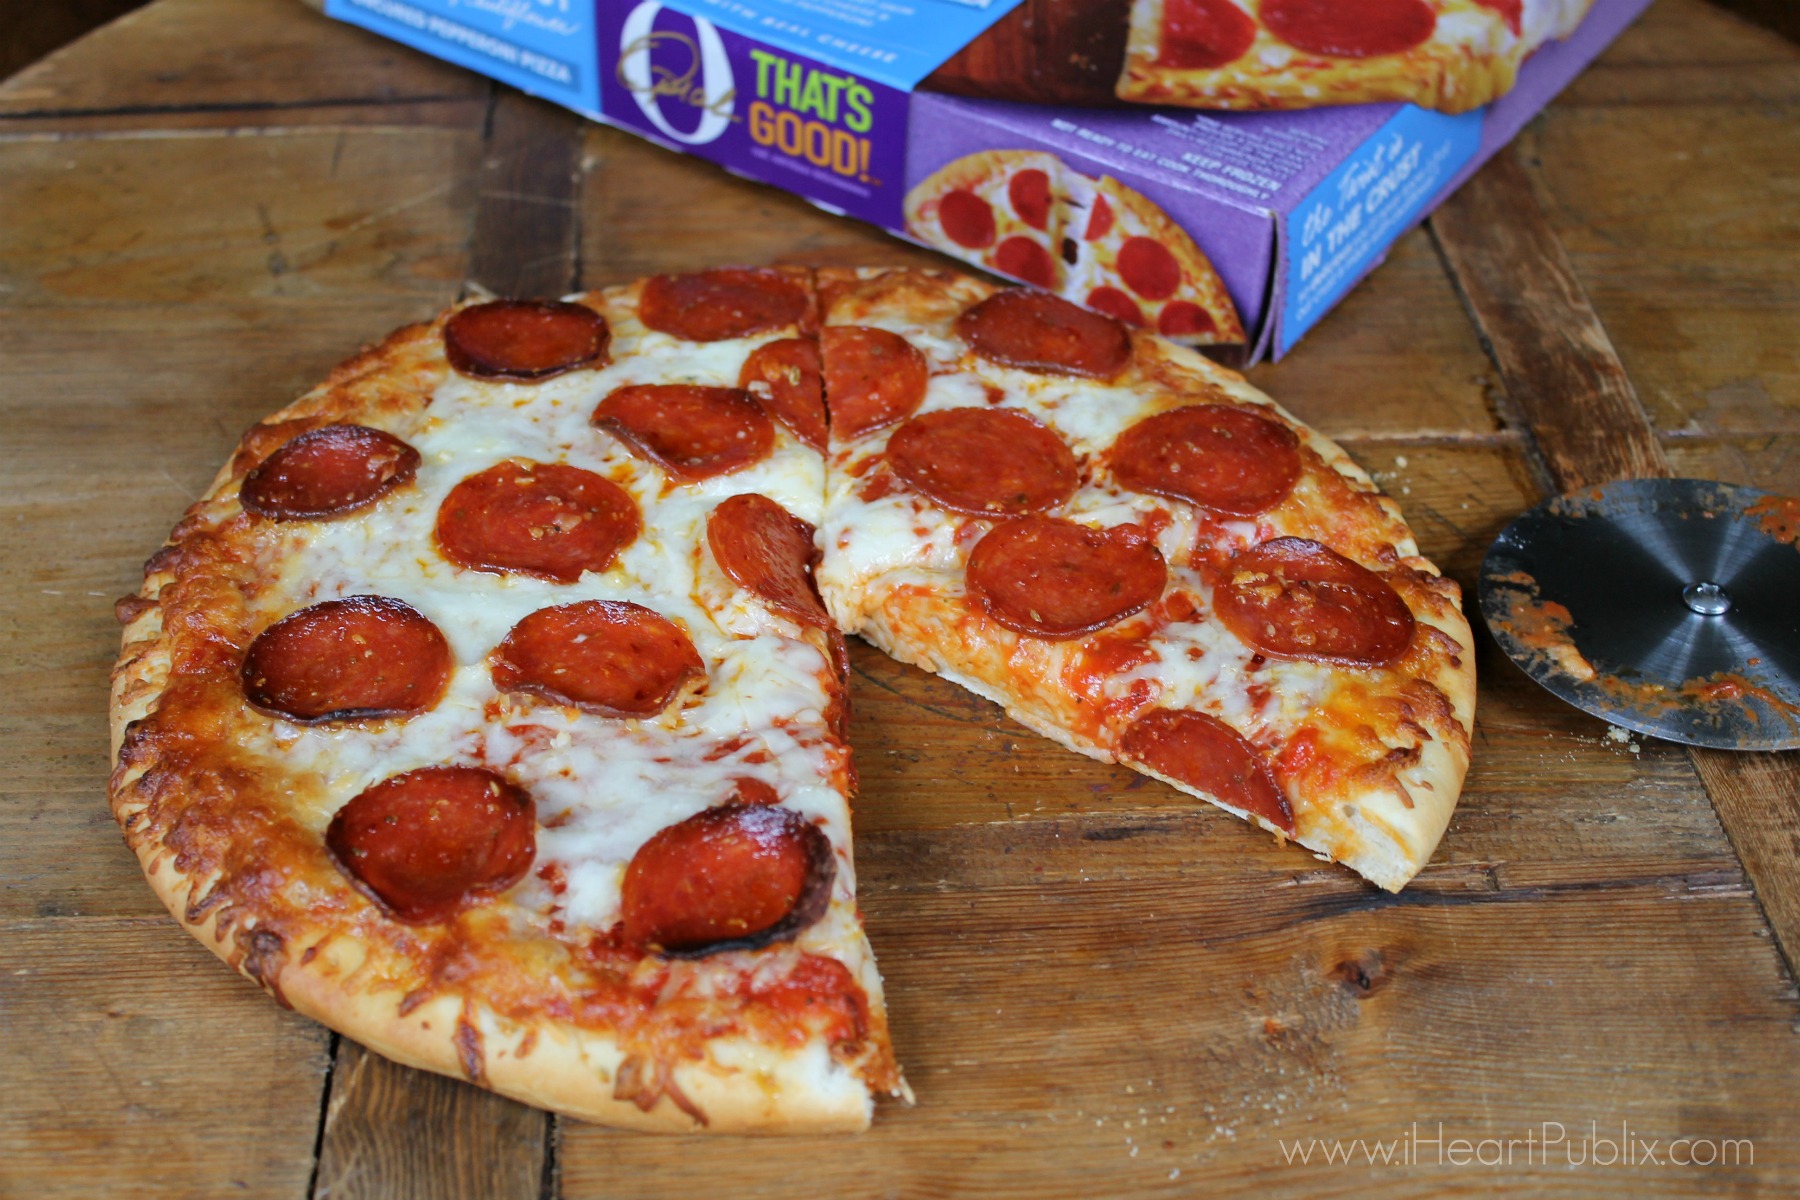 O, That’s Good Pizza BOGO This Week At Publix - The Cheesy Pizza You